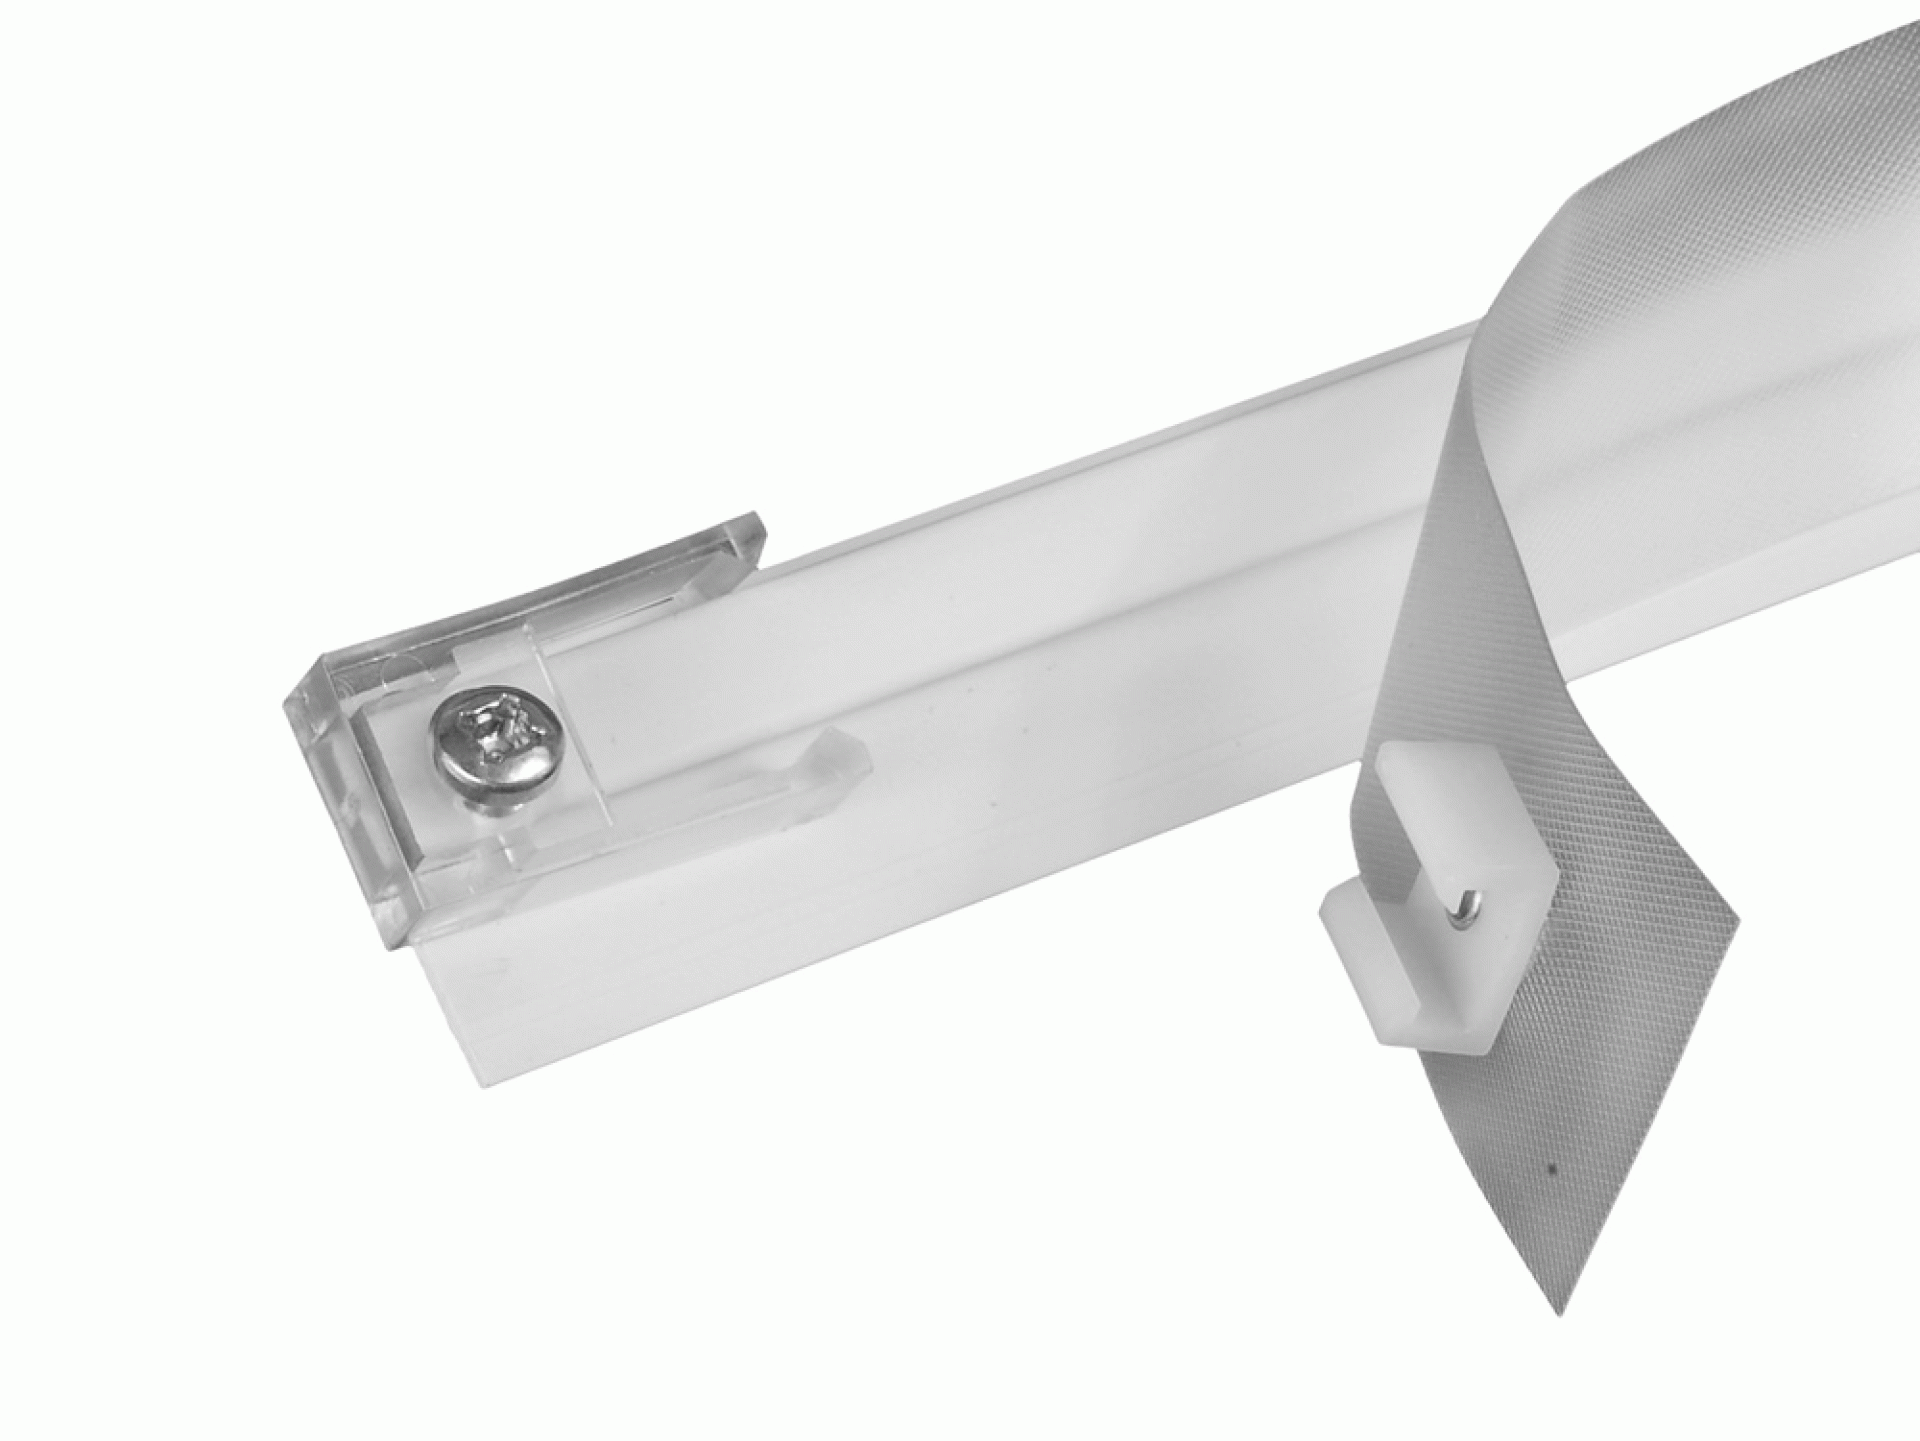 RV DESIGNER COLLECTION | A502 | Curtain Kit - Wall Mount